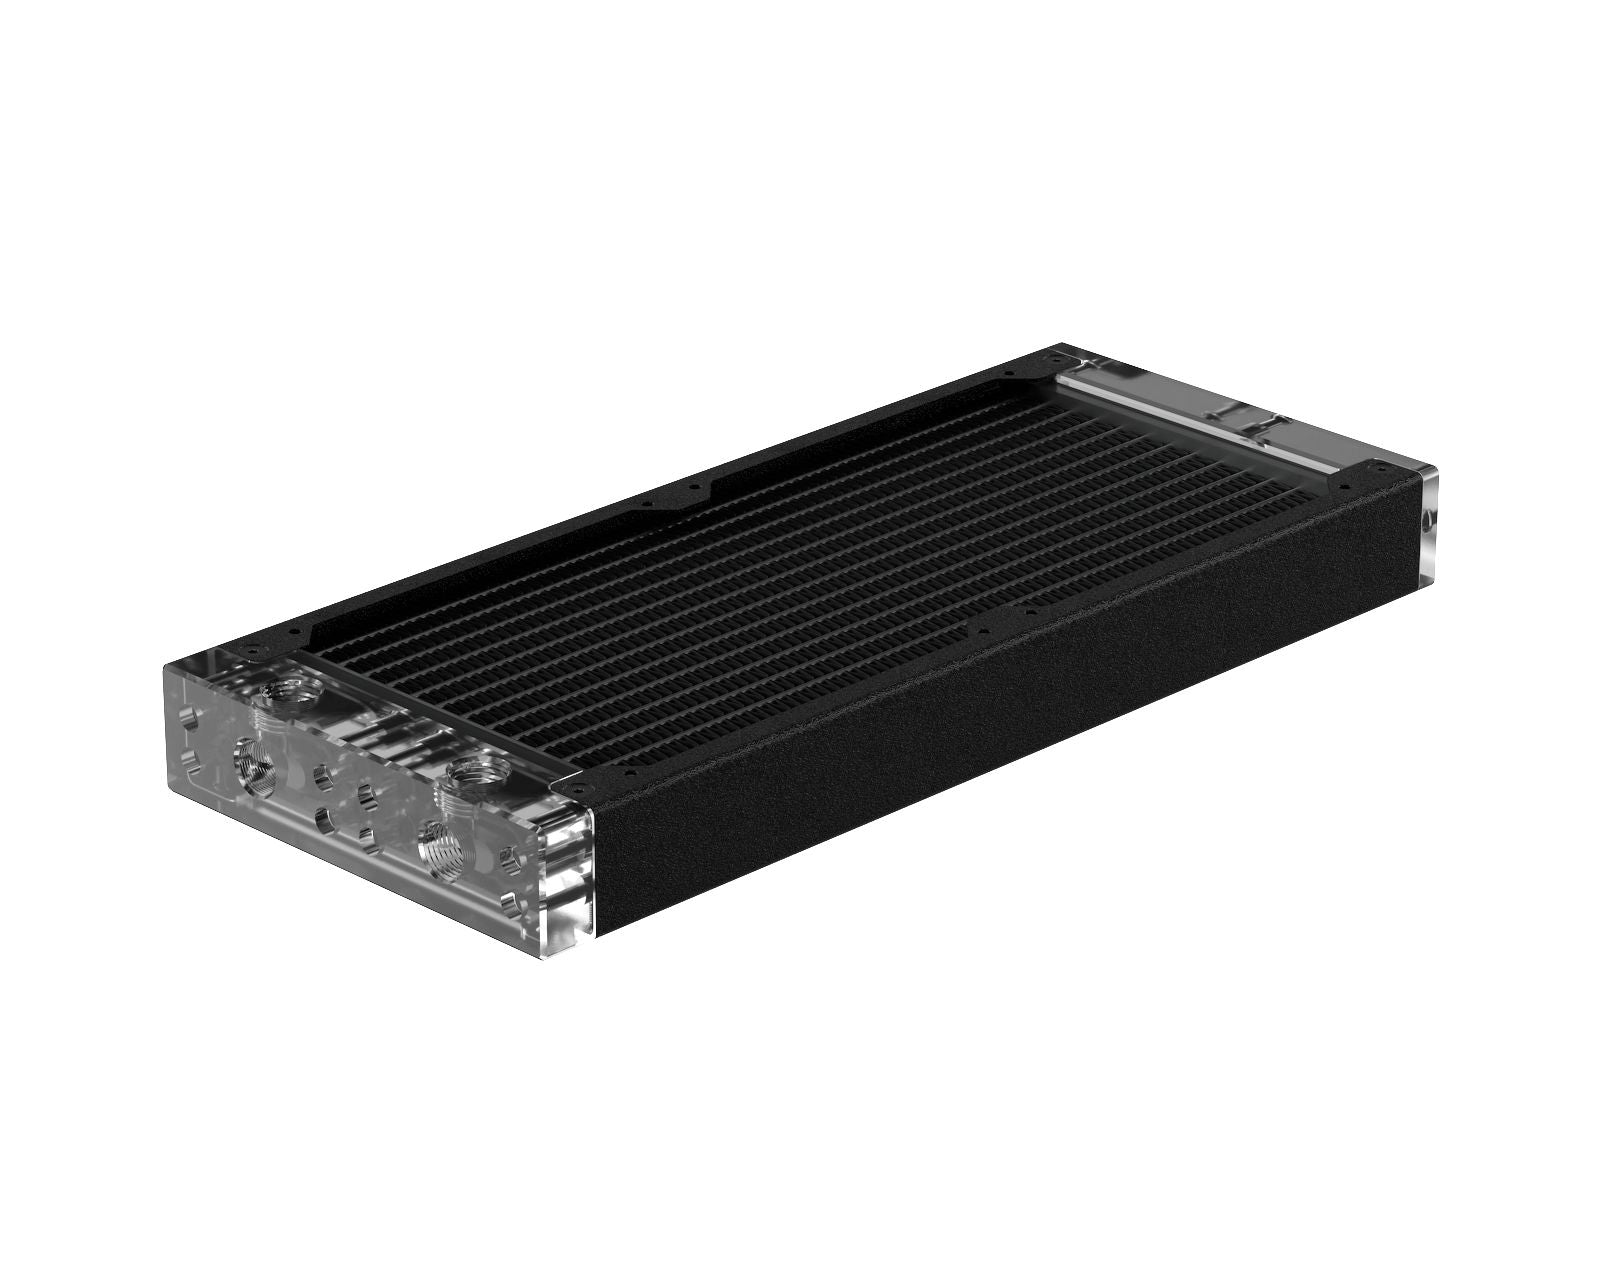 PrimoChill 240SL (30mm) EXIMO Modular Radiator, Clear Acrylic, 2x120mm, Dual Fan (R-SL-A24) Available in 20+ Colors, Assembled in USA and Custom Watercooling Loop Ready - TX Matte Black